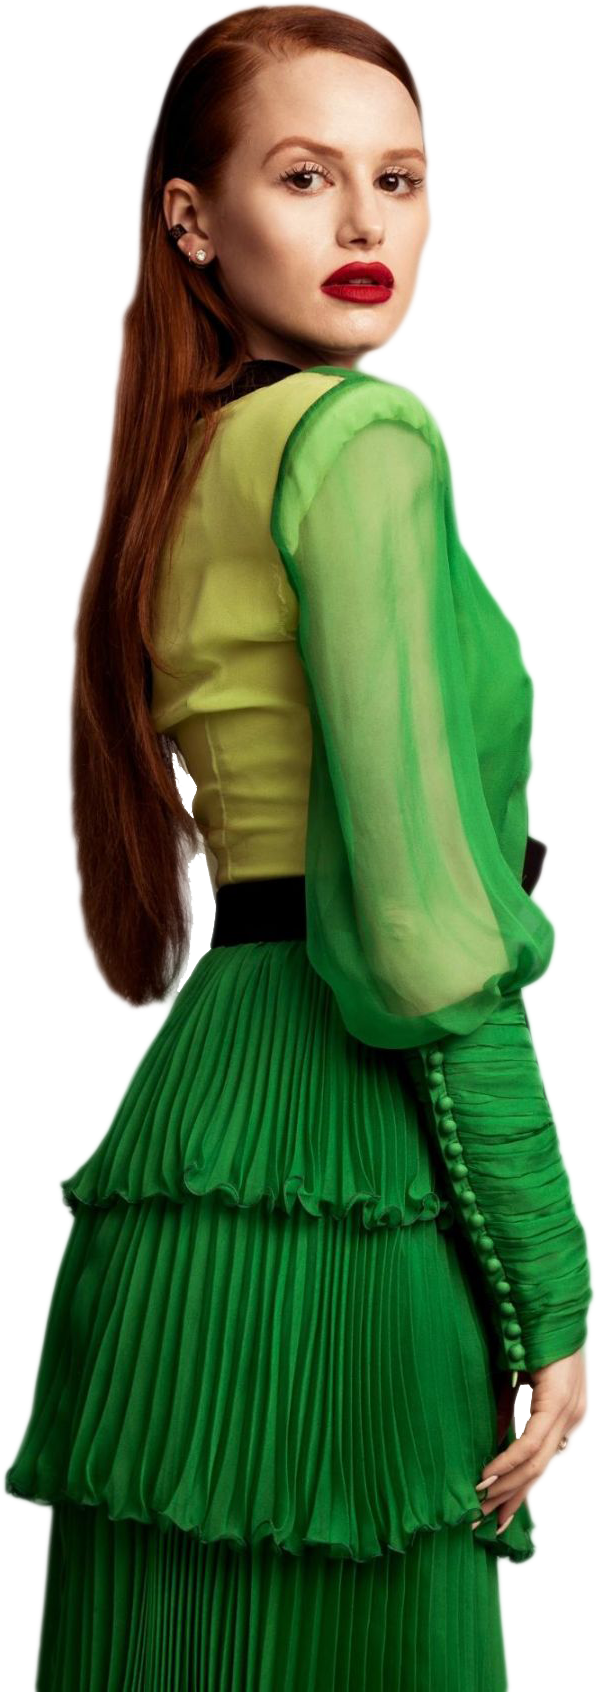 Madelaine Petsch Png Image - Madelaine Petsch Photoshoot 2018 (1200x1800), Png Download